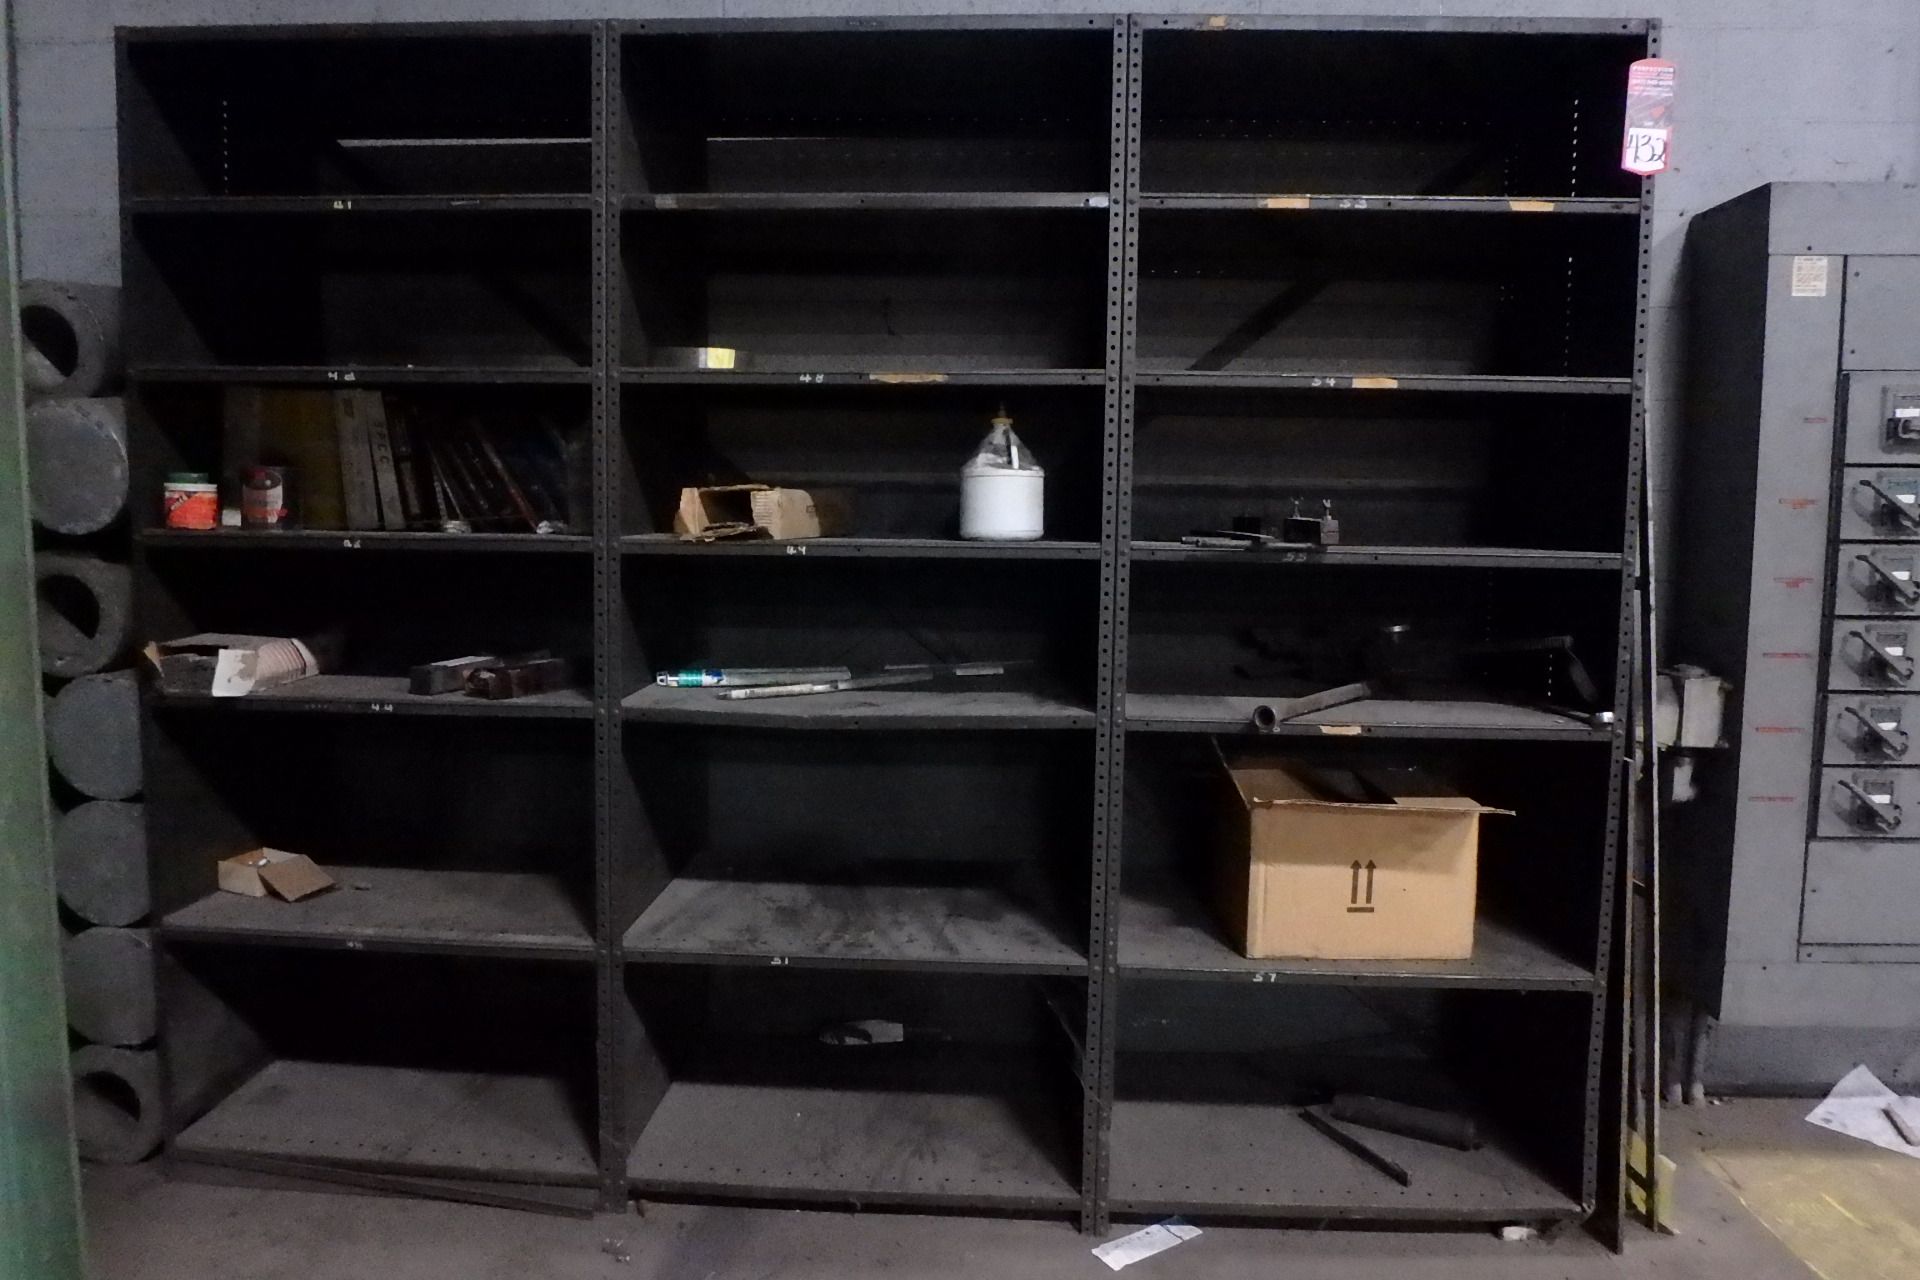 Lot Comprising (3) Sections of 87" x 24" x 36" Shelving; (2) Sections of 82" x 18" x 32"